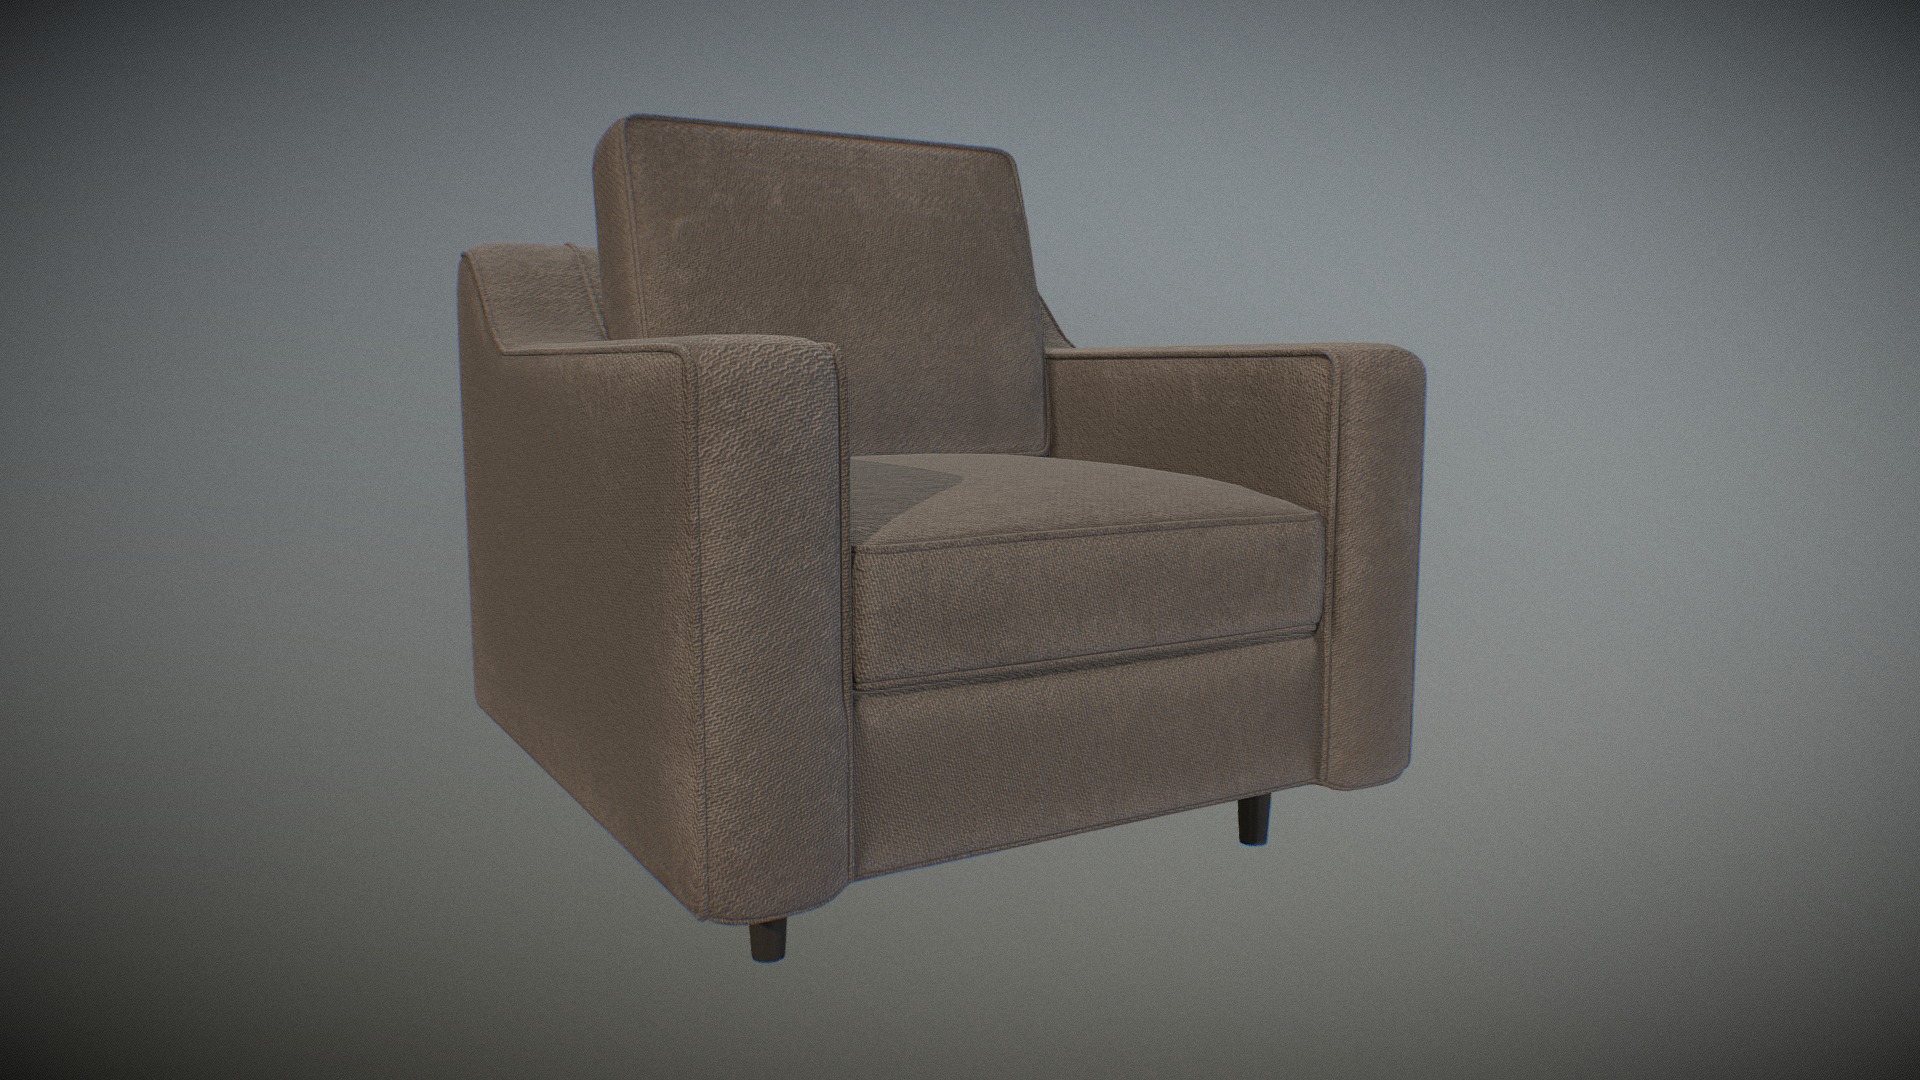 3D model Garrison Sofa 01 - This is a 3D model of the Garrison Sofa 01. The 3D model is about a chair with a cushion.